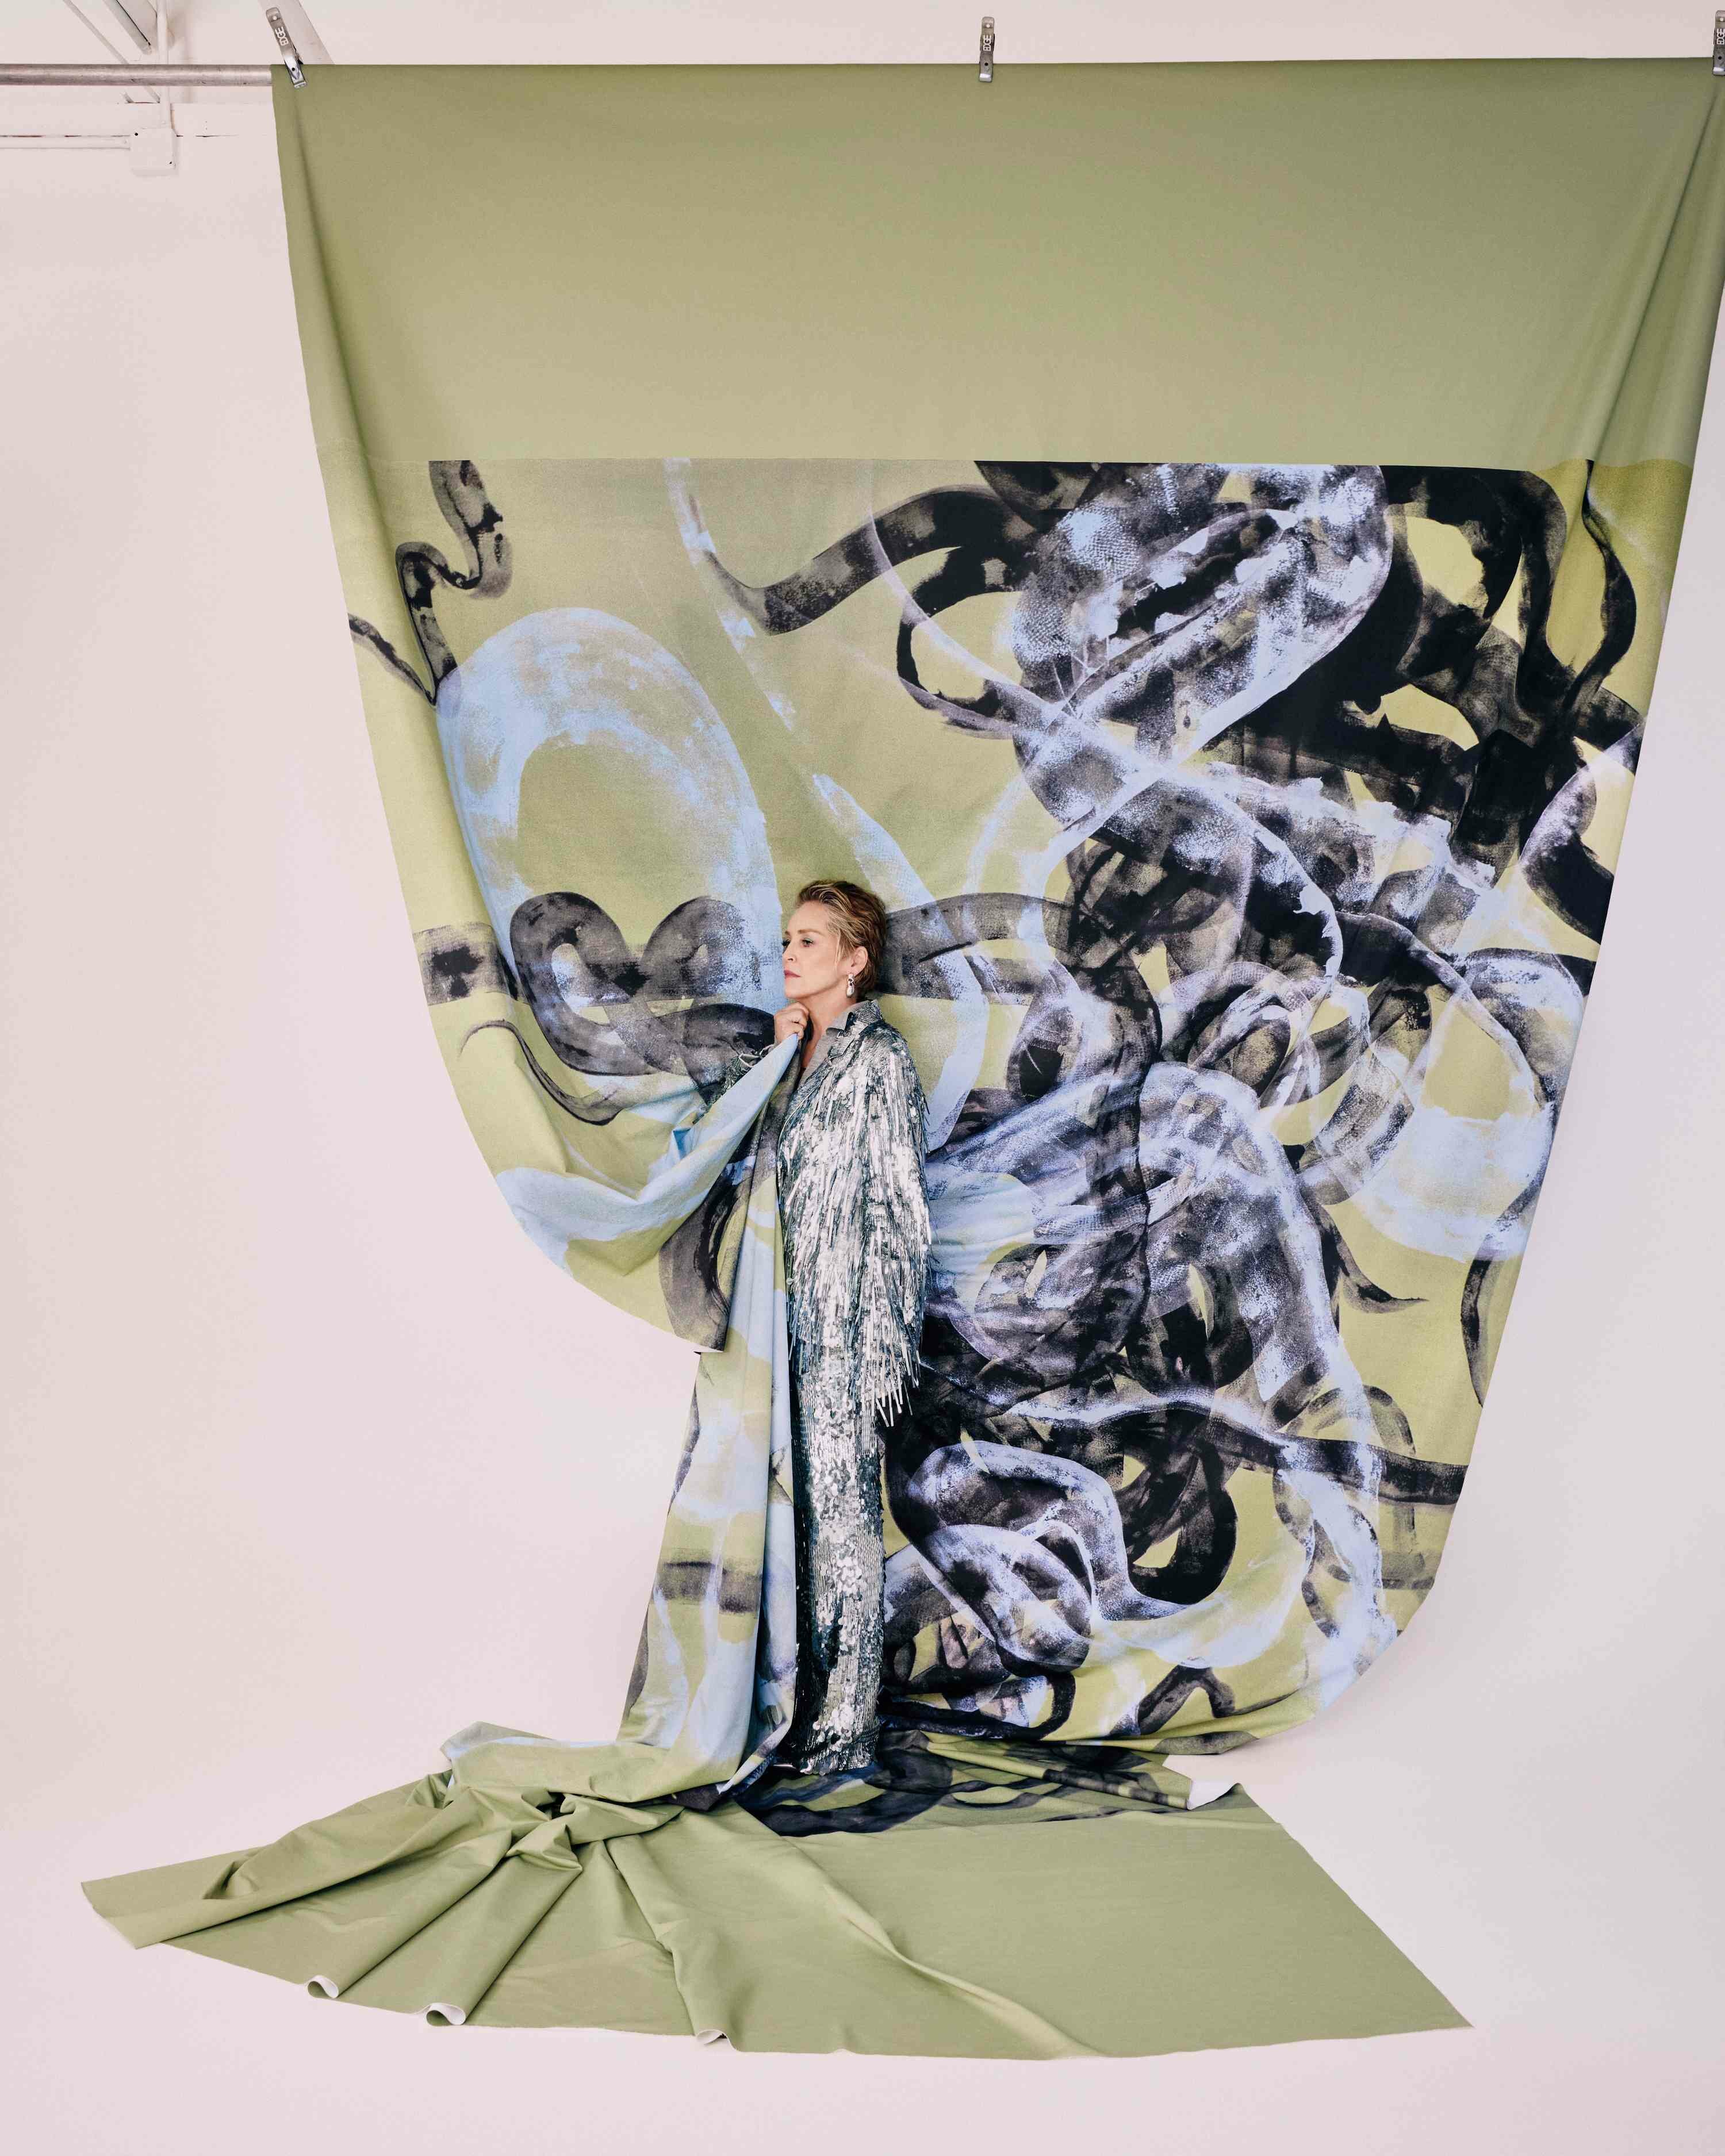 Sharon Stone Silver Frayed Suit tugging on painting backdrop